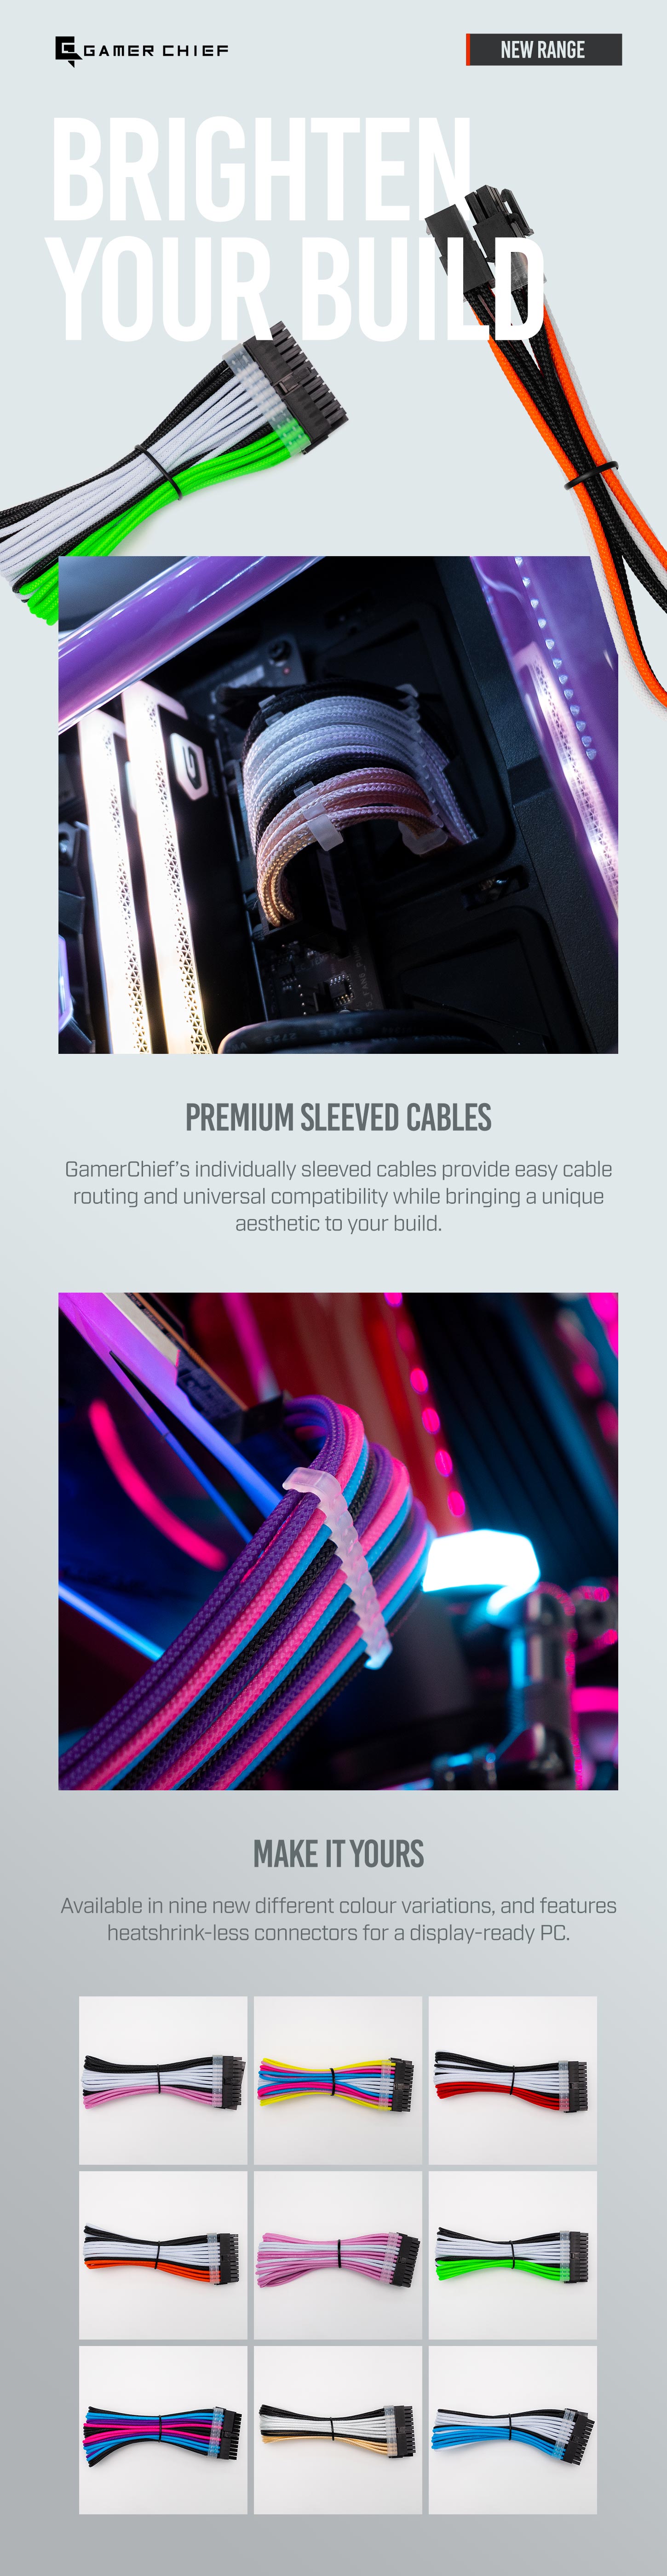 A large marketing image providing additional information about the product GamerChief Elite Series 24-Pin ATX 30cm Sleeved Extension Cable (Yellow / Light Pink / Pink / Blue / White) - Additional alt info not provided